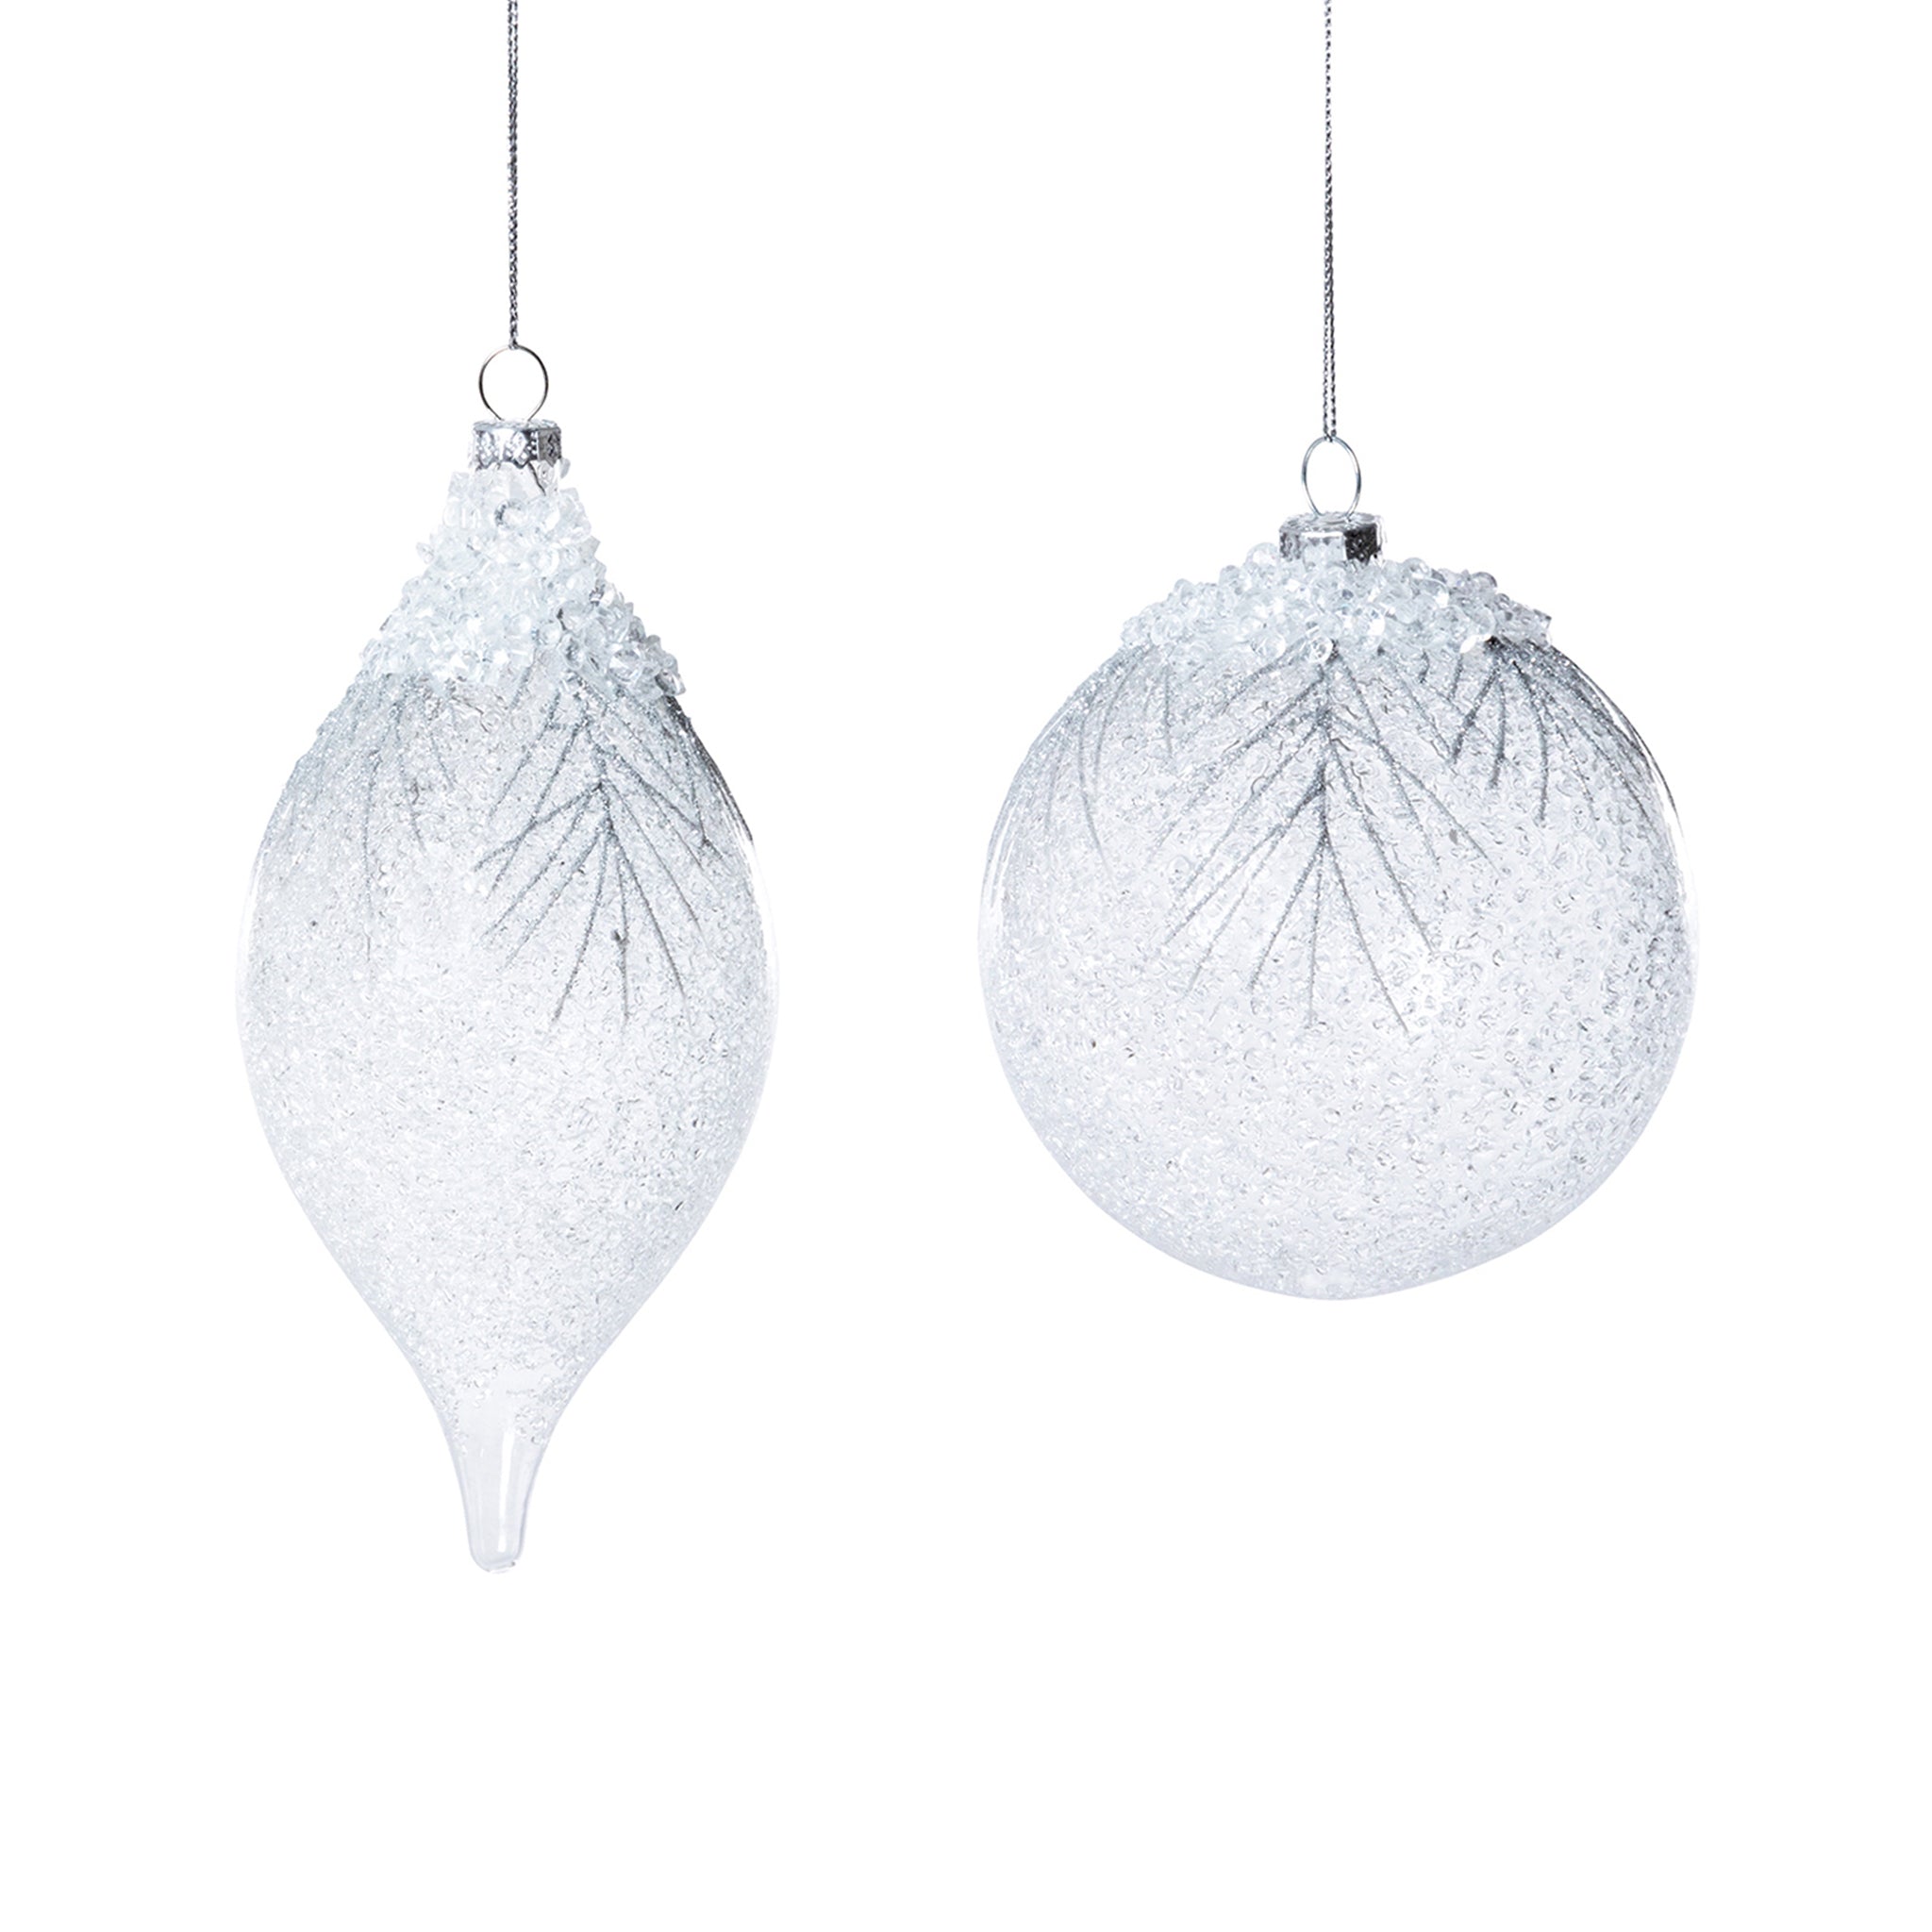 Icy Ornament Collection, Set of 6